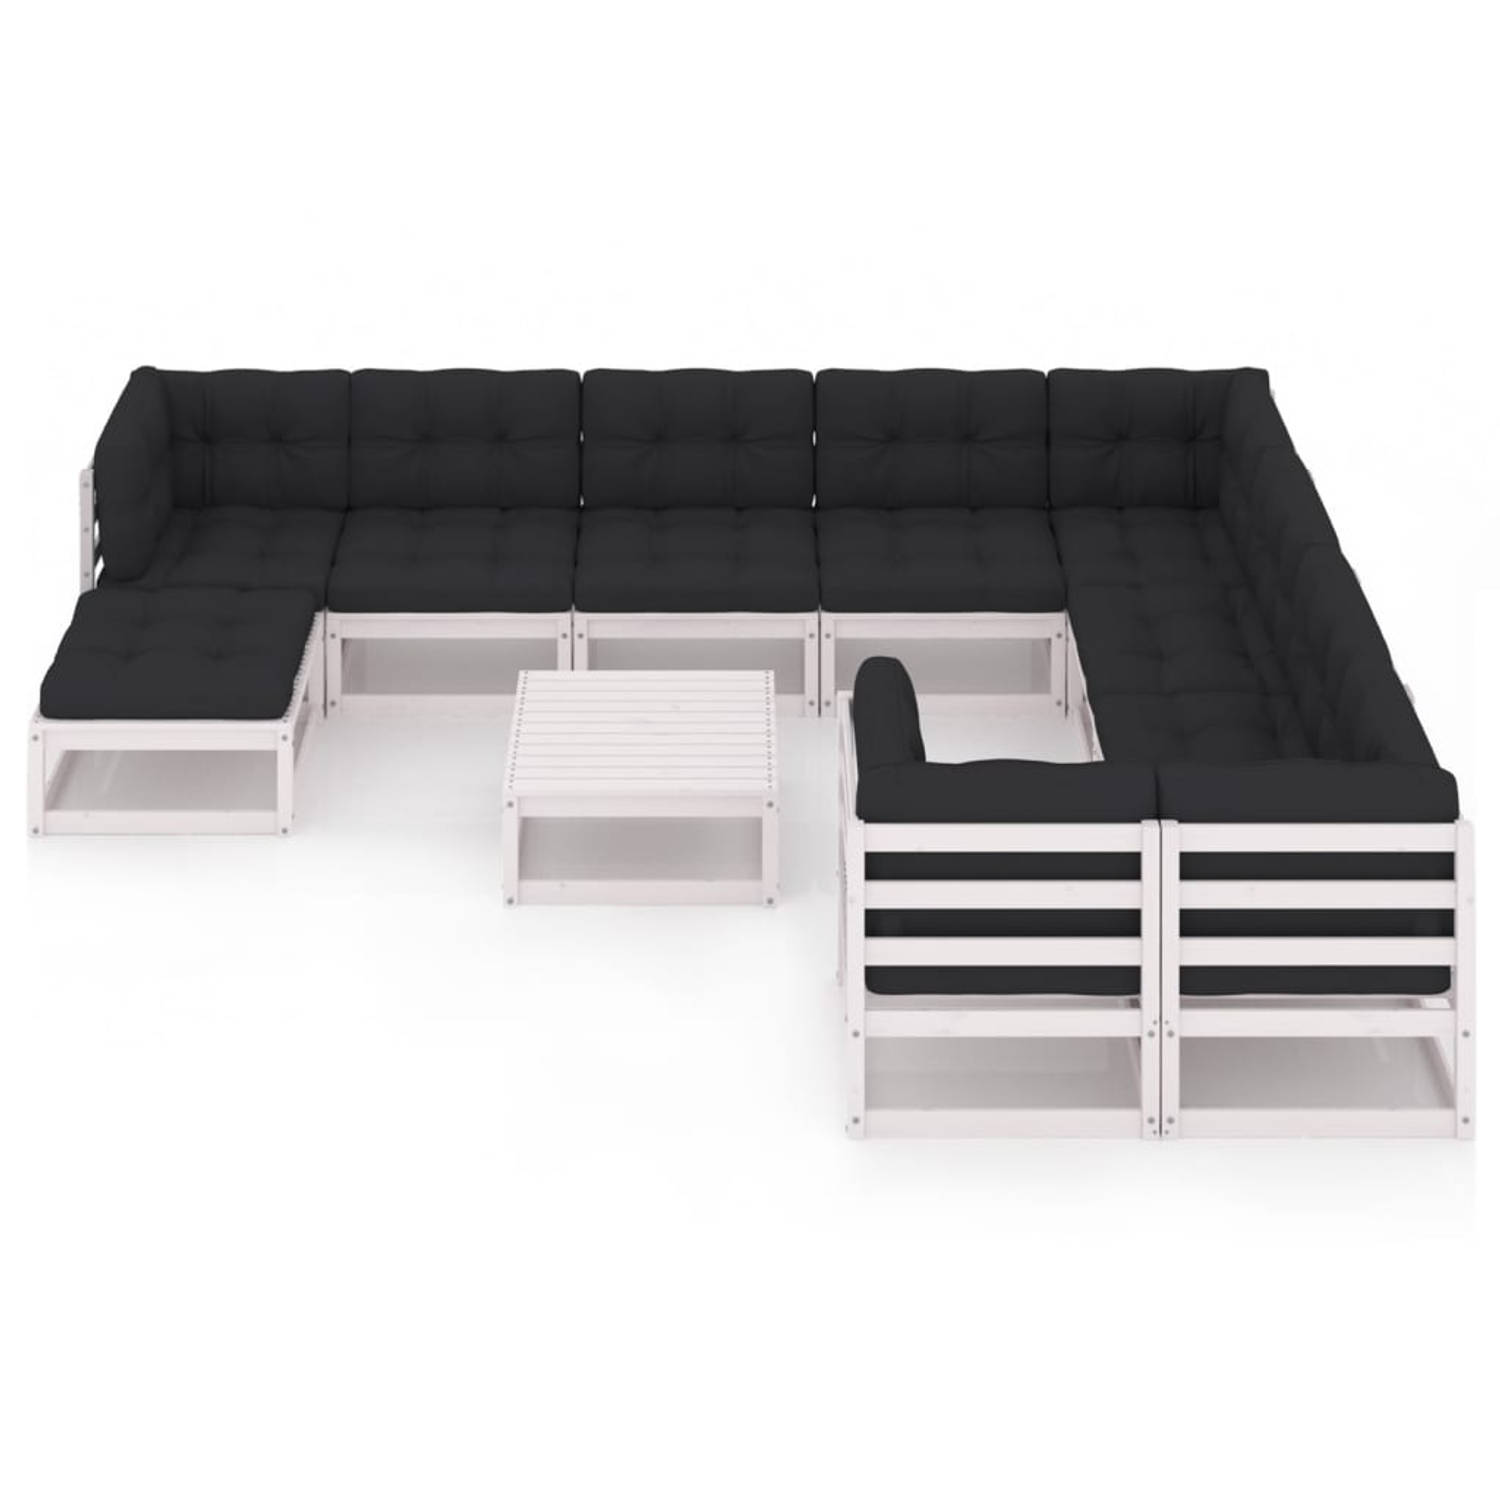 The Living Store Loungeset Grenenhout - Tuinmeubelen - 70x70x67cm - Wit - Antraciet